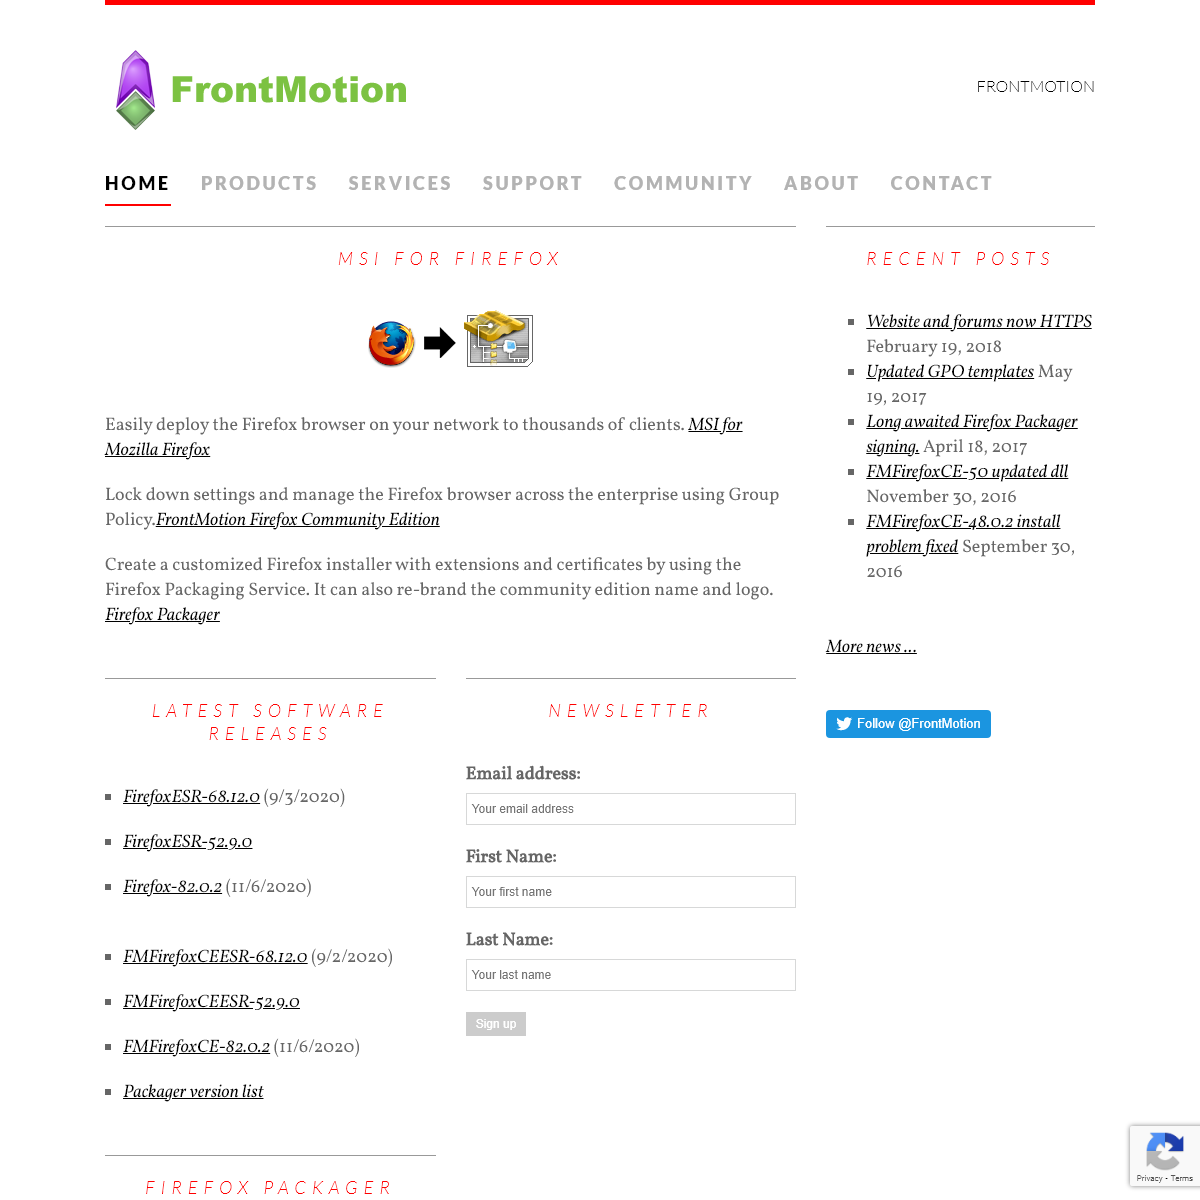 A complete backup of frontmotion.com